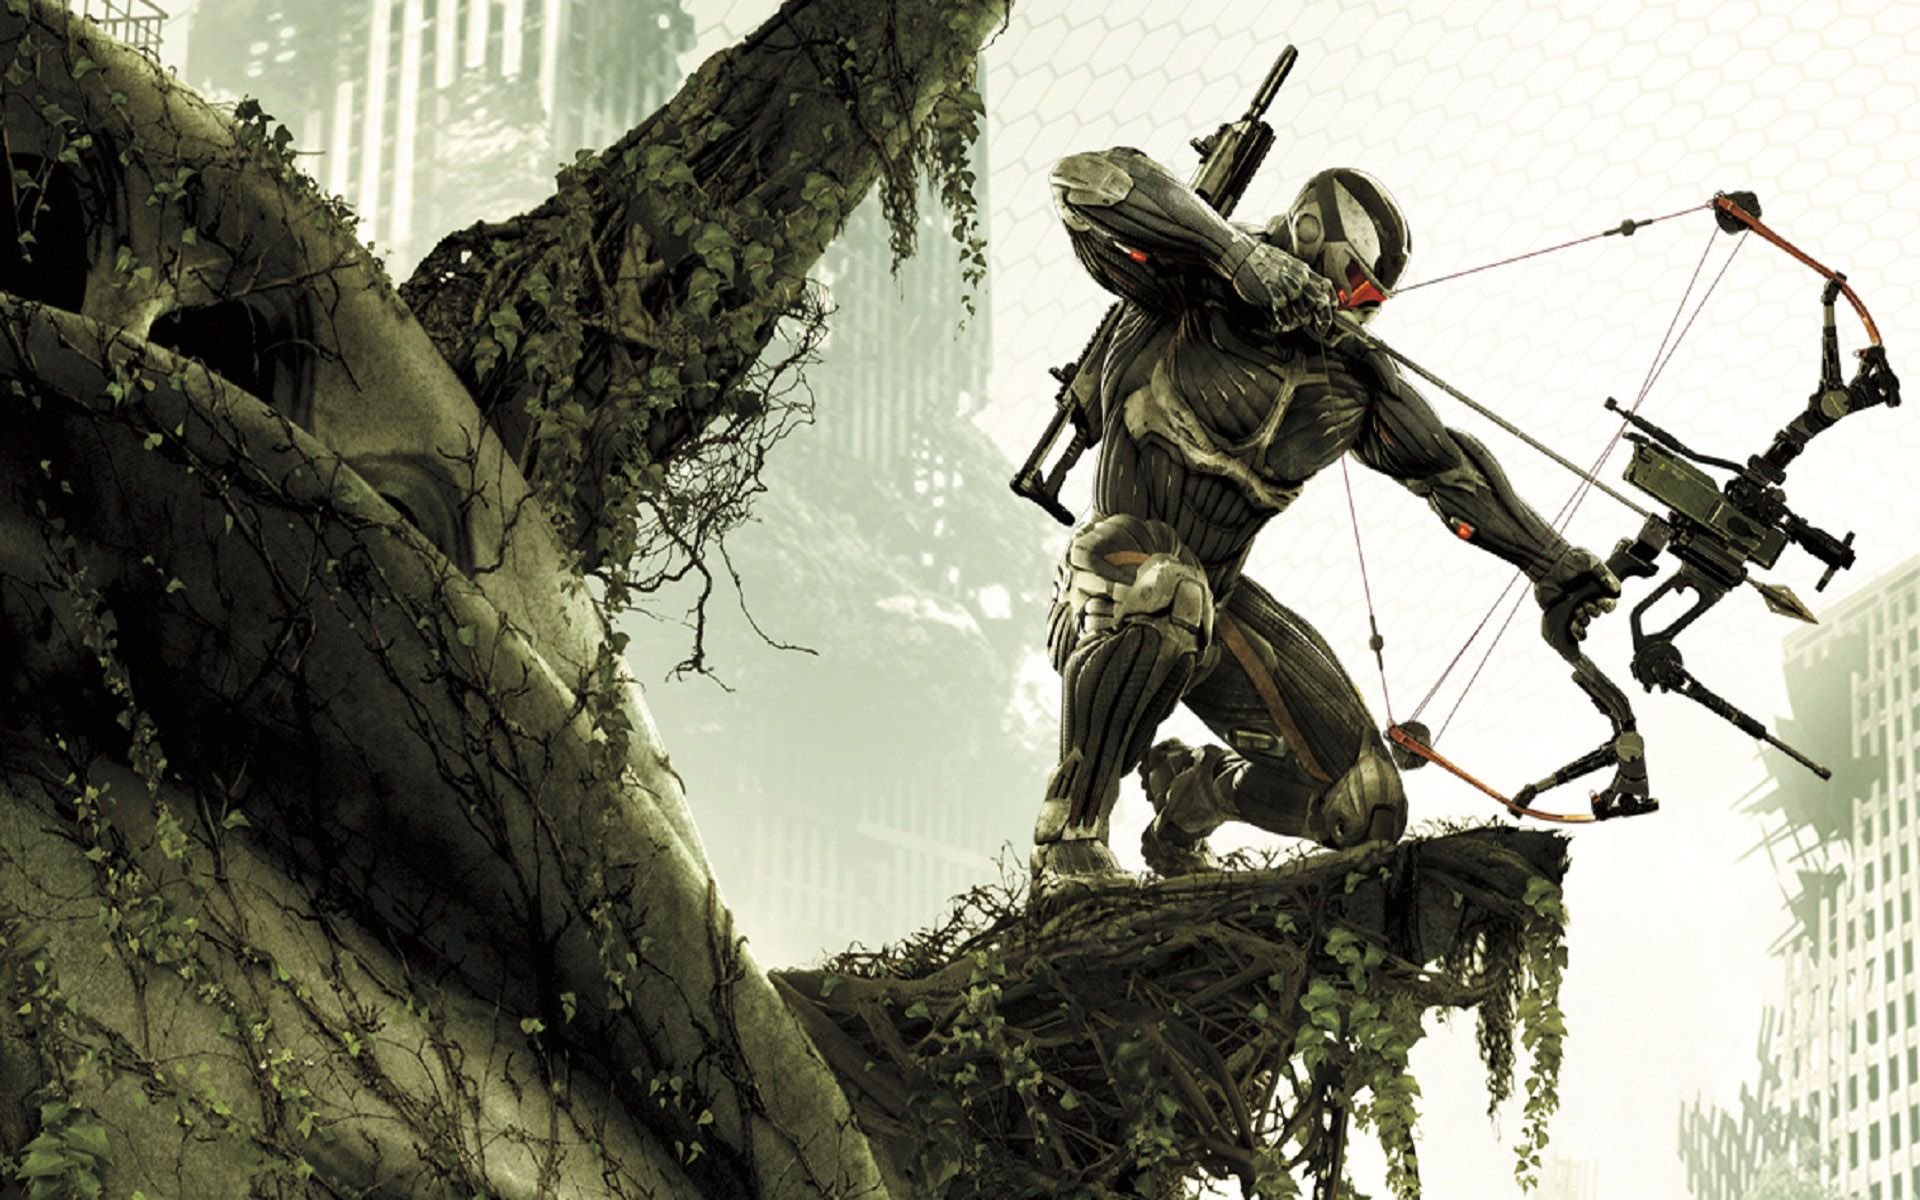 crysis, Sci fi, Fps, Shooter, Action, Fighing, Futuristic, Warrior, Archer, Military Wallpaper